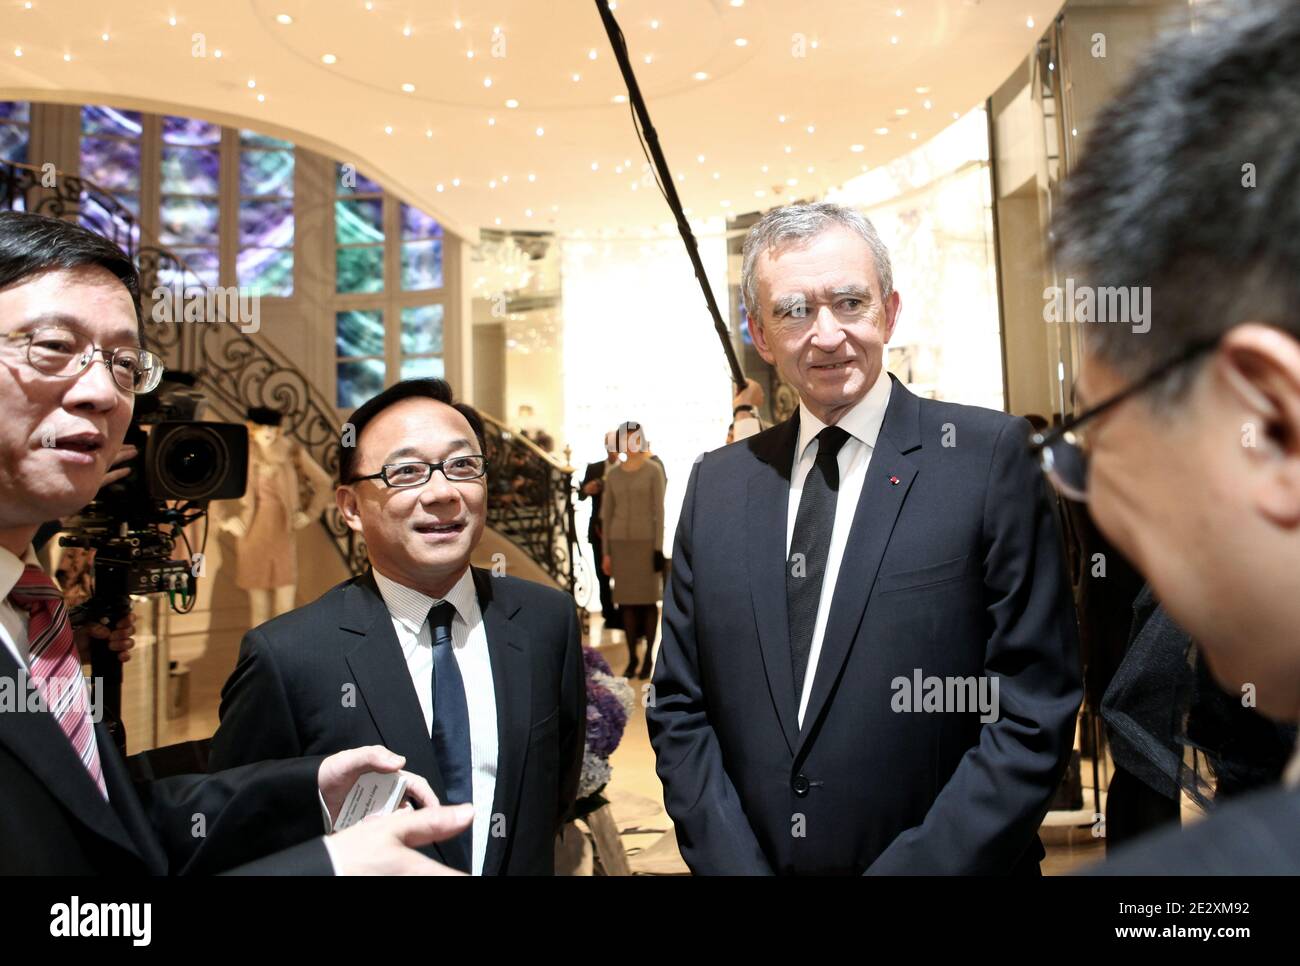 Billionaire owner of LVMH appoints daughter to run Dior